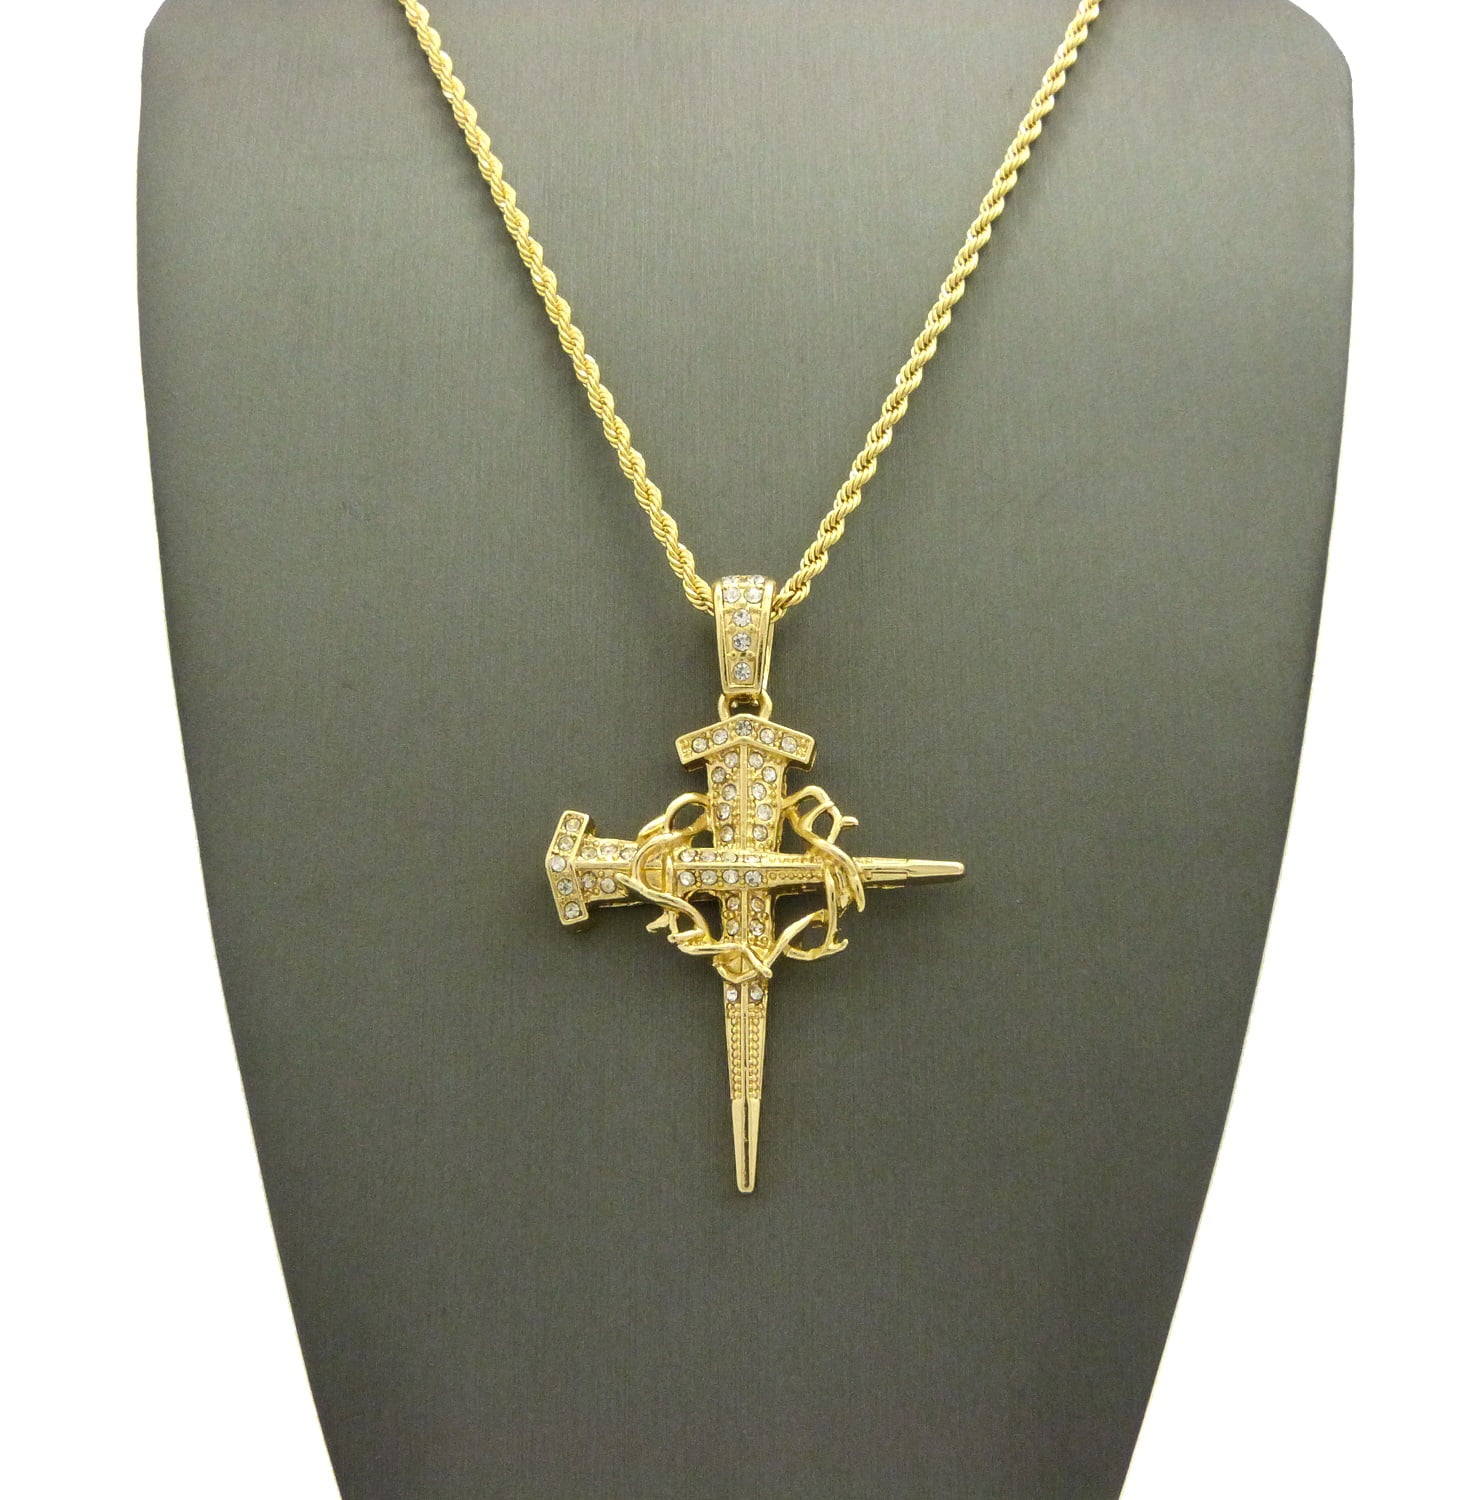 Crown Of Thorns Nail Cross Necklace Rope Chain – Forgiven Jewelry